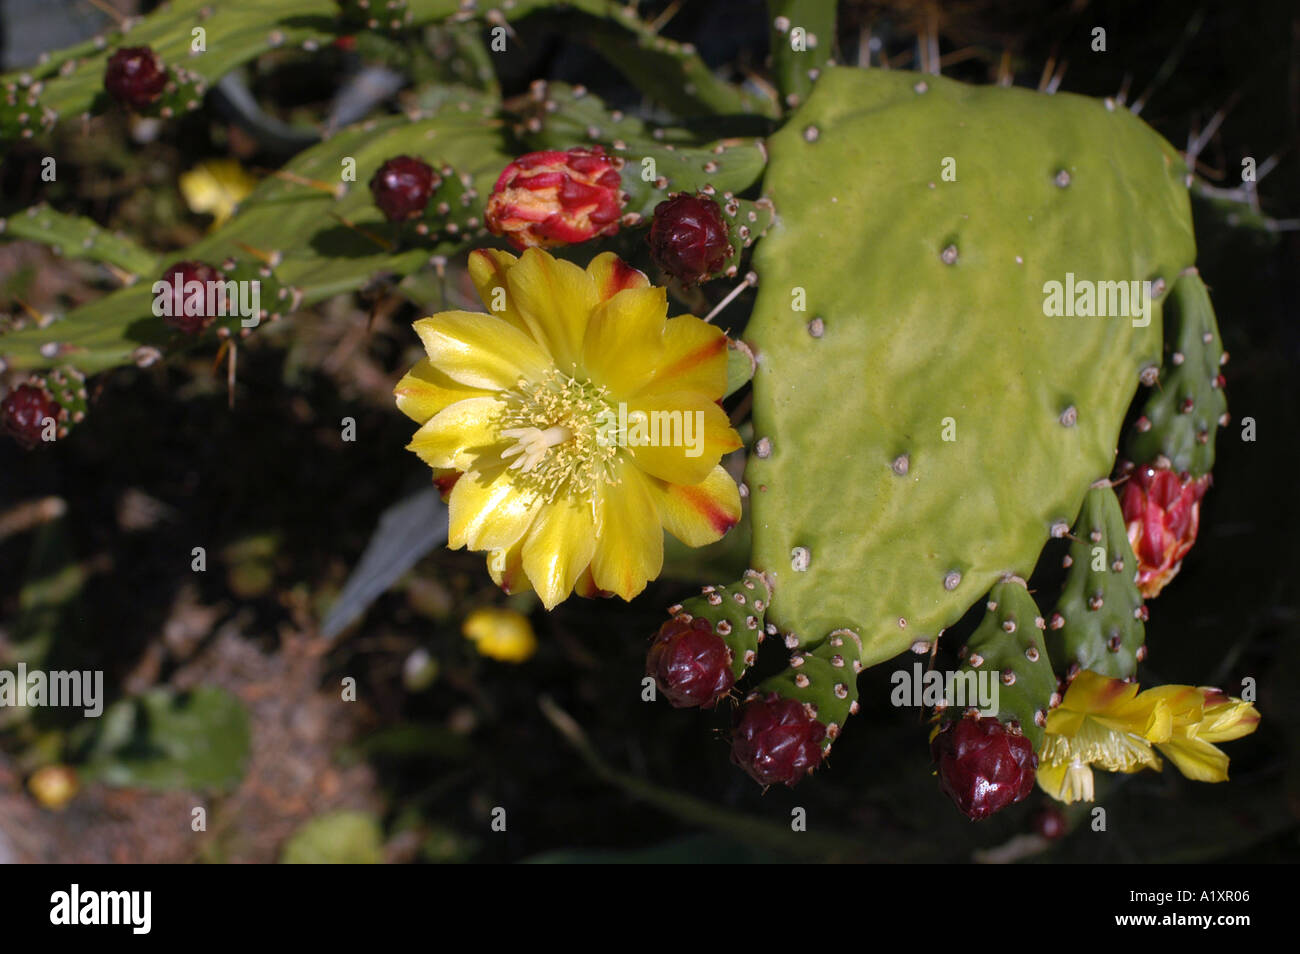 A flowering prickly pear cactus with red buds and yellow flowers Stock Photo